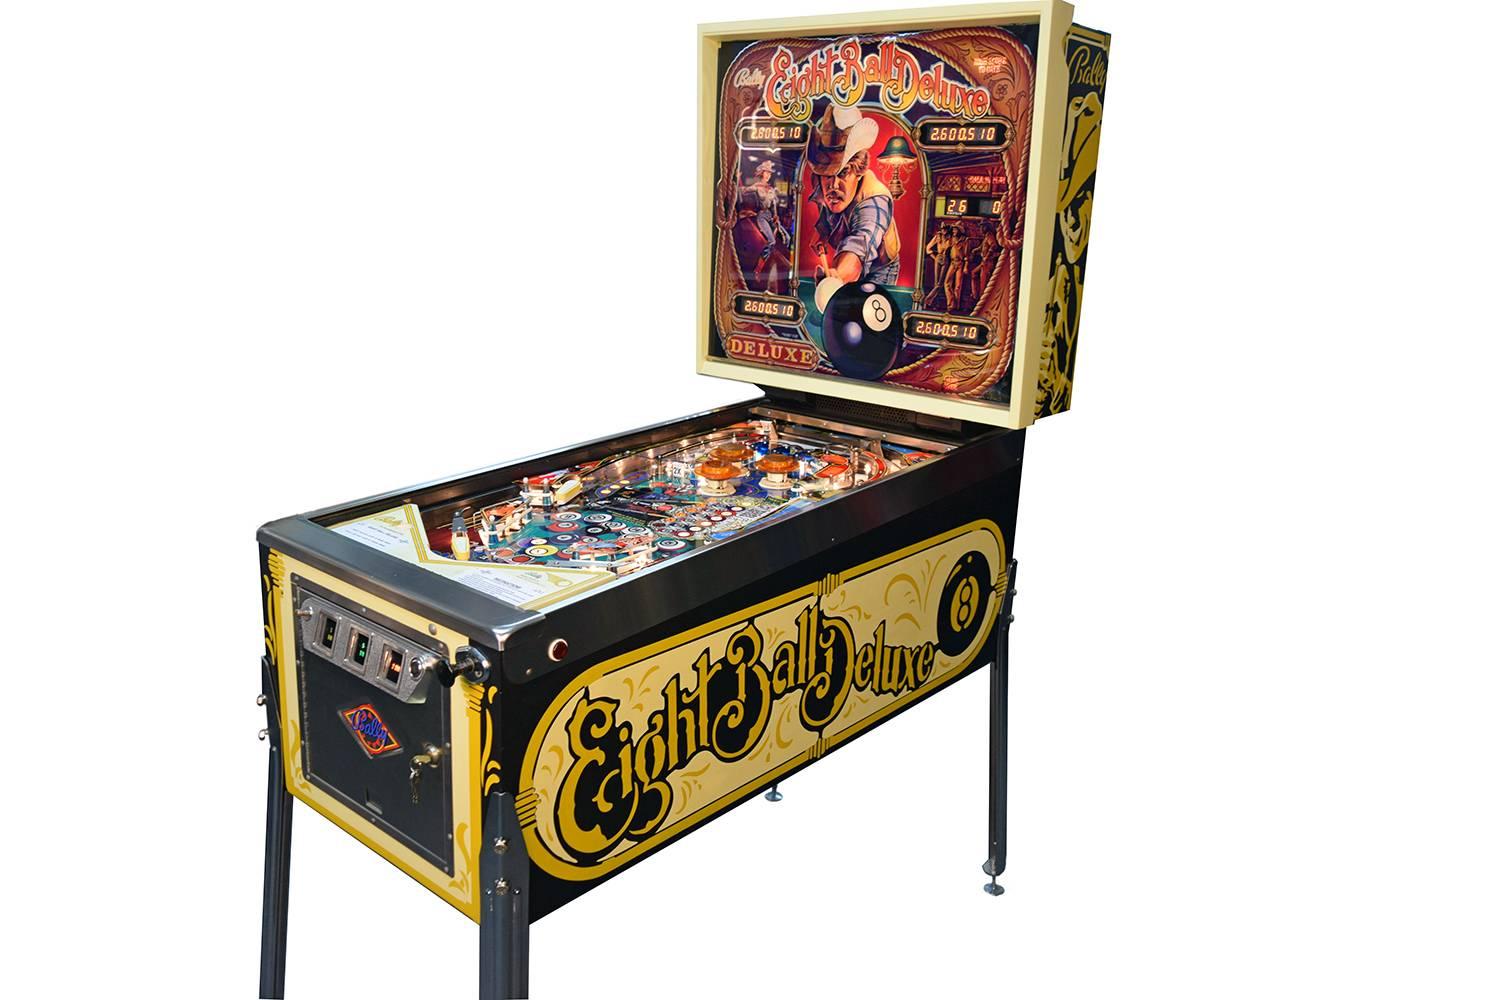 Eight Ball Deluxe was another big hit for Bally back in the 1980s and is one of most sought-after Bally solid state games today. It was extremely popular and could be found in almost any pub or arcade in the early 80's. It was one of Ballys biggest